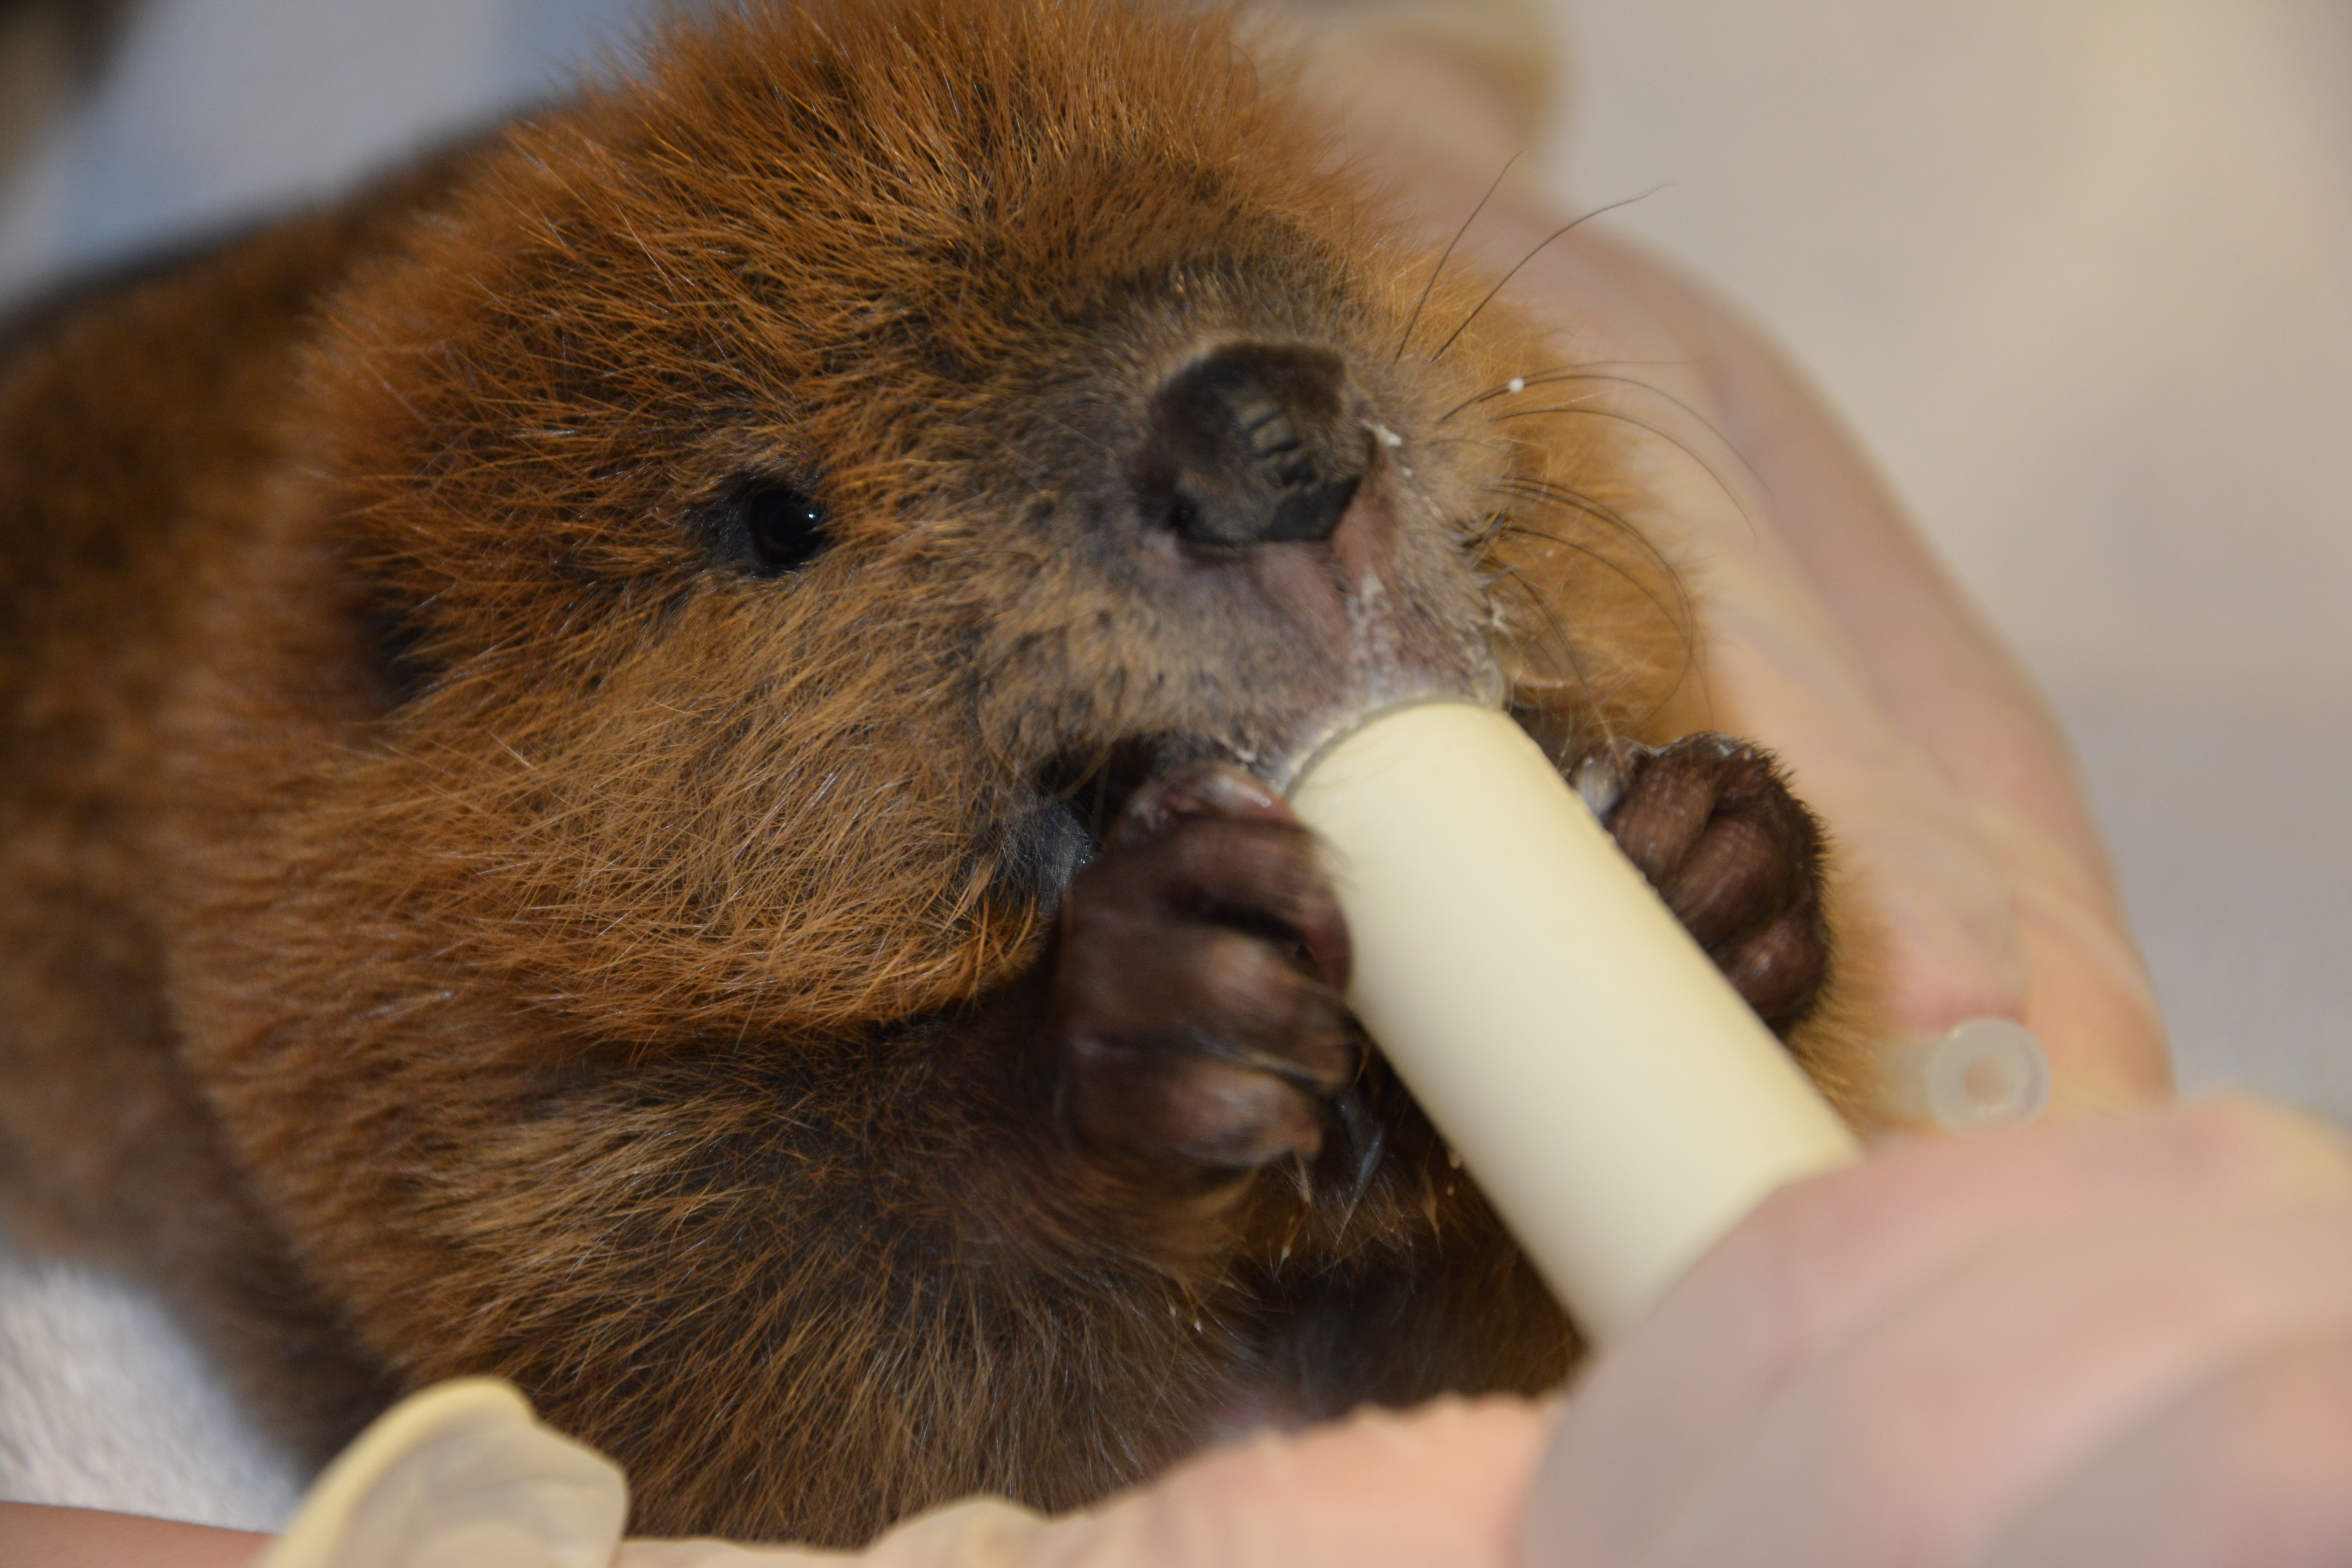 baby beaver feeding time at Janet L. Swanson Wildlife Health Center before going onto a licensed wildlife rehabilitator for further care